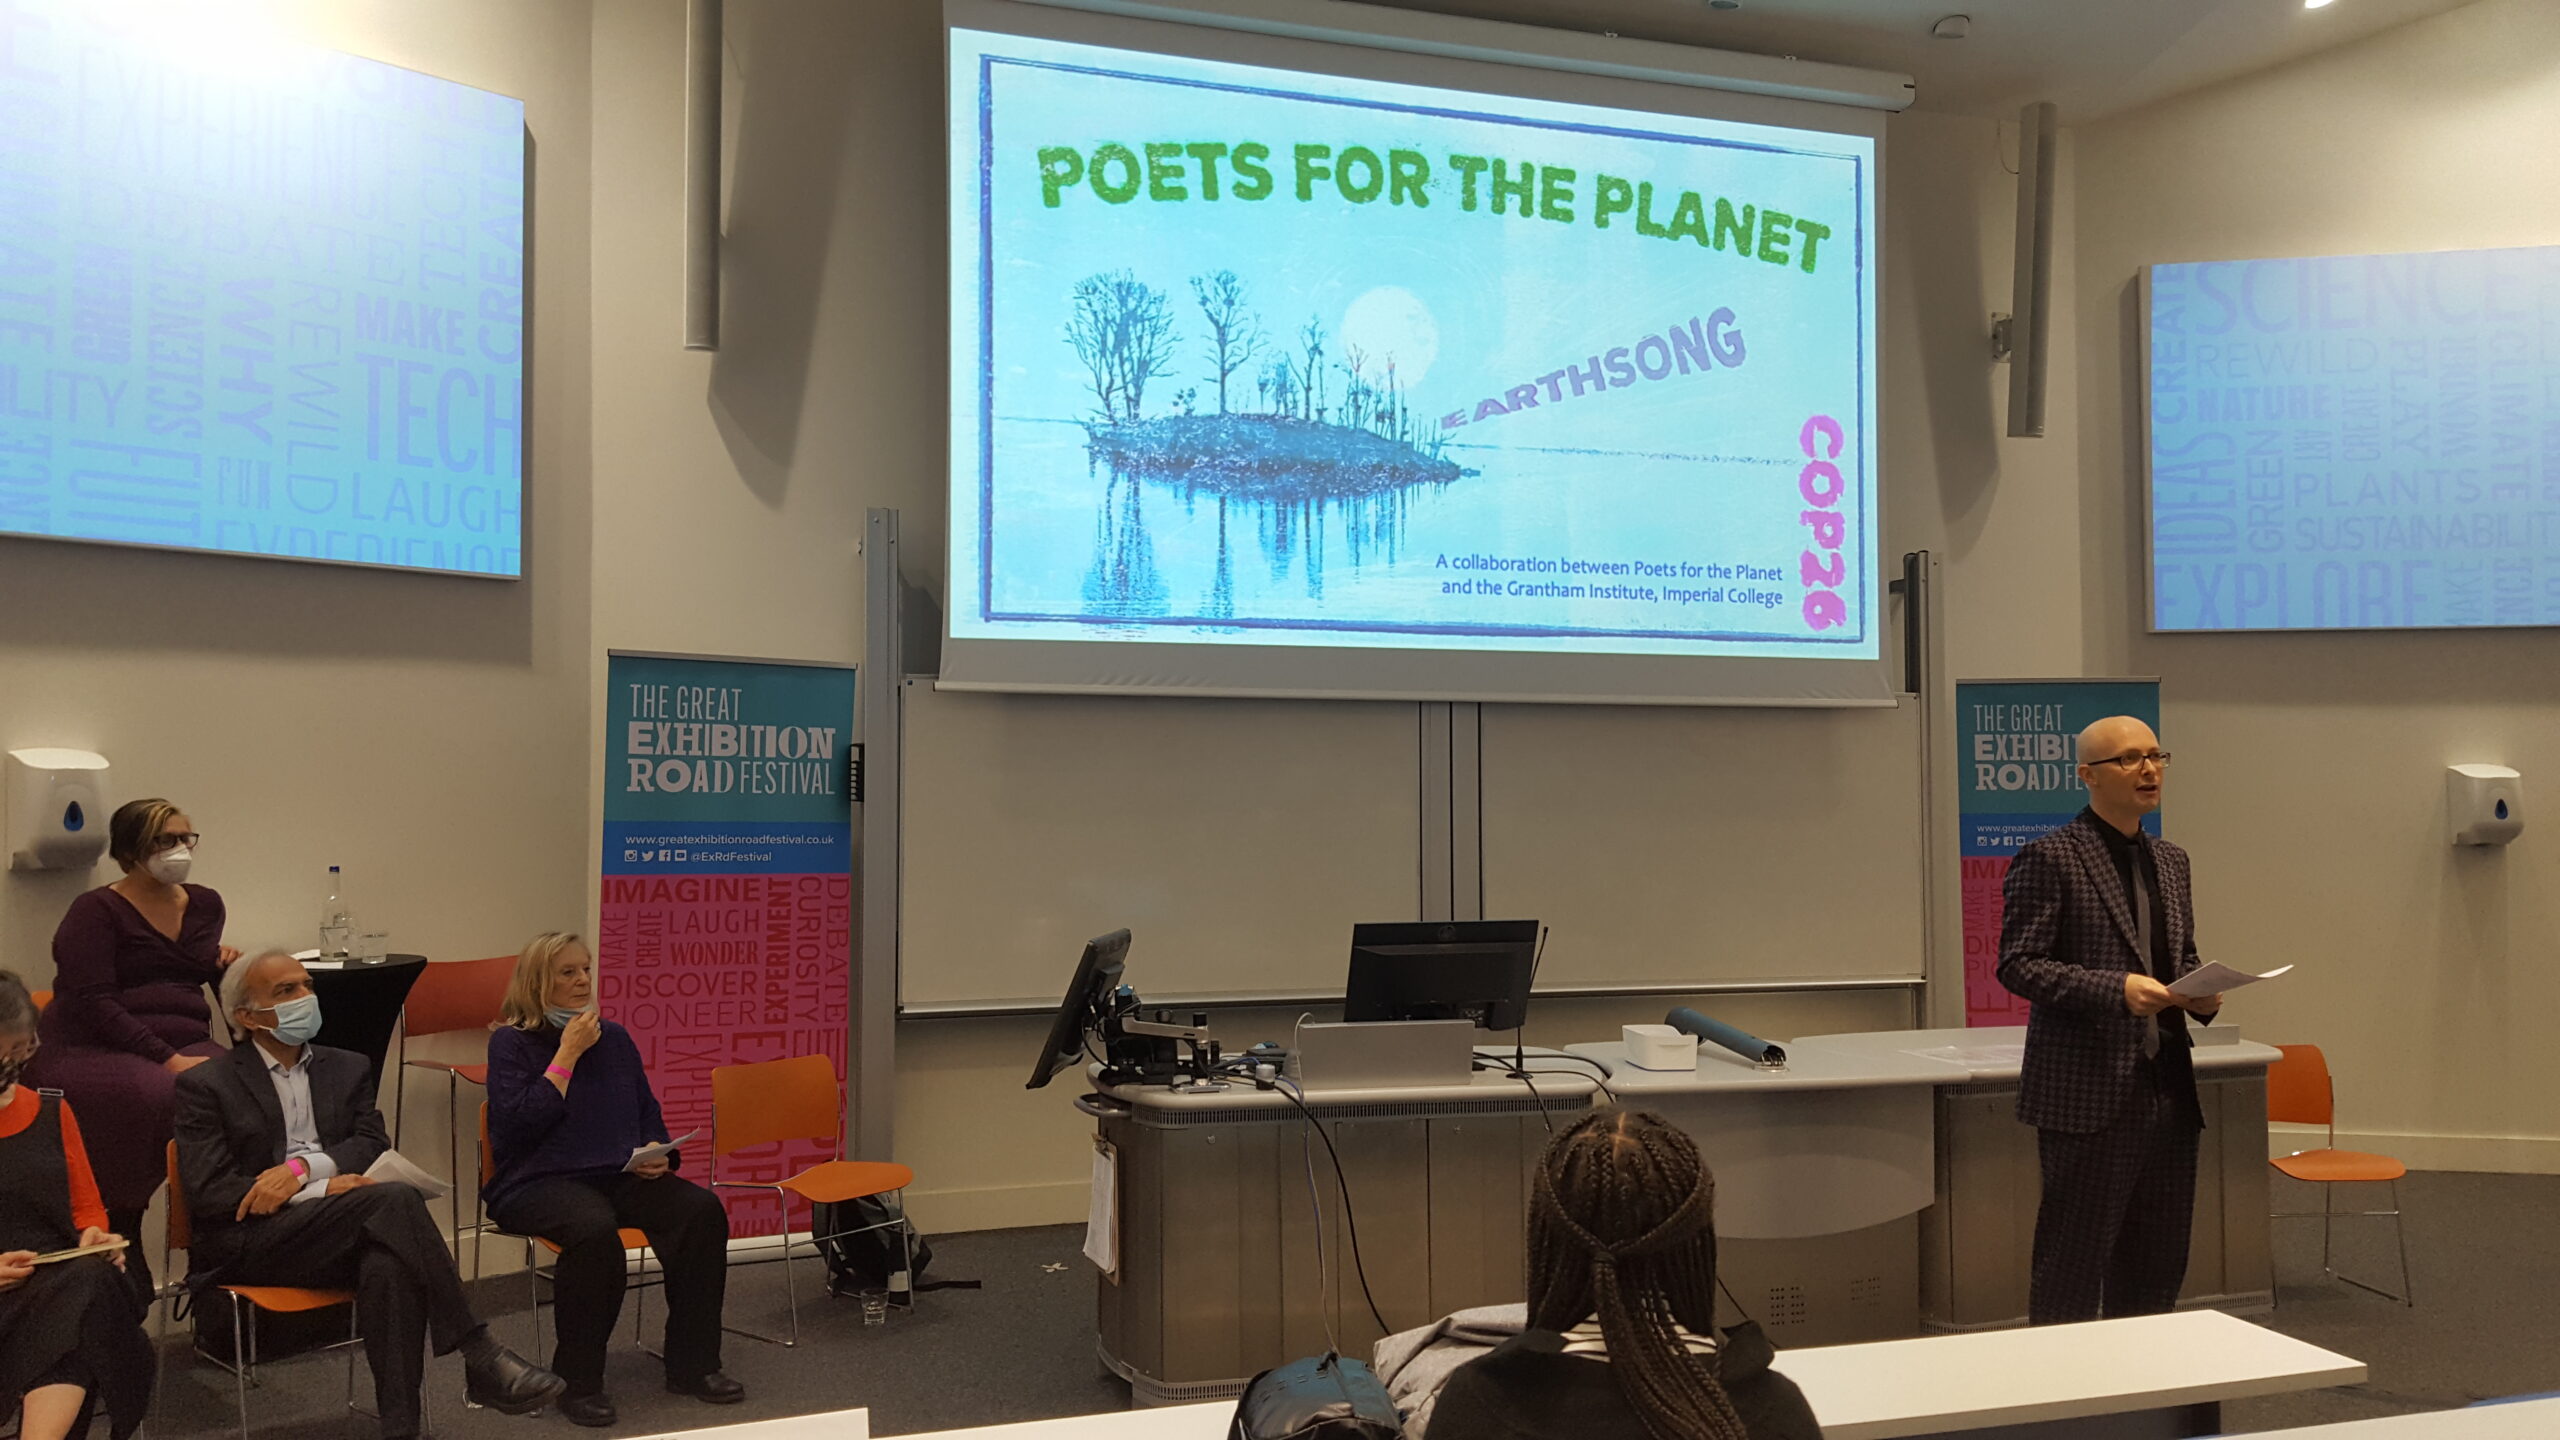 Ian McLachlan introduces Poets for the Planet at the Great Exhibition Road Festival 2021